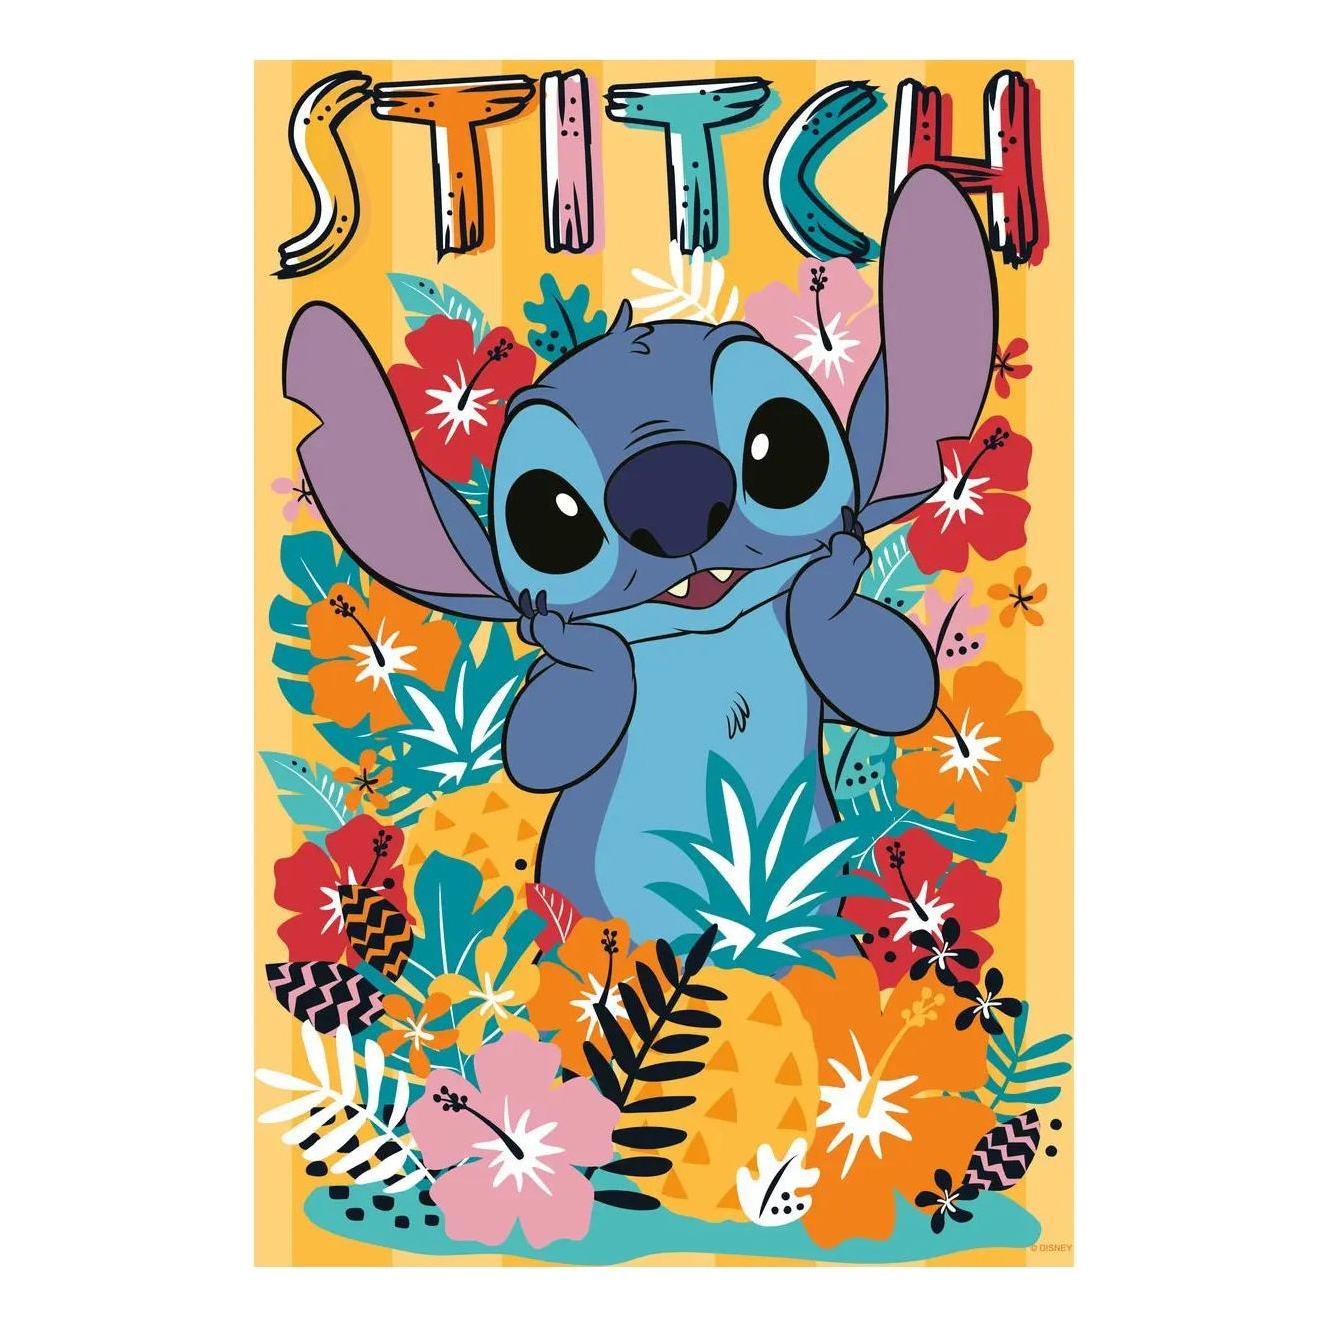 Ravensburger puzzle Lilo & Stitch 3D puzzle ball with Stitch ears (72